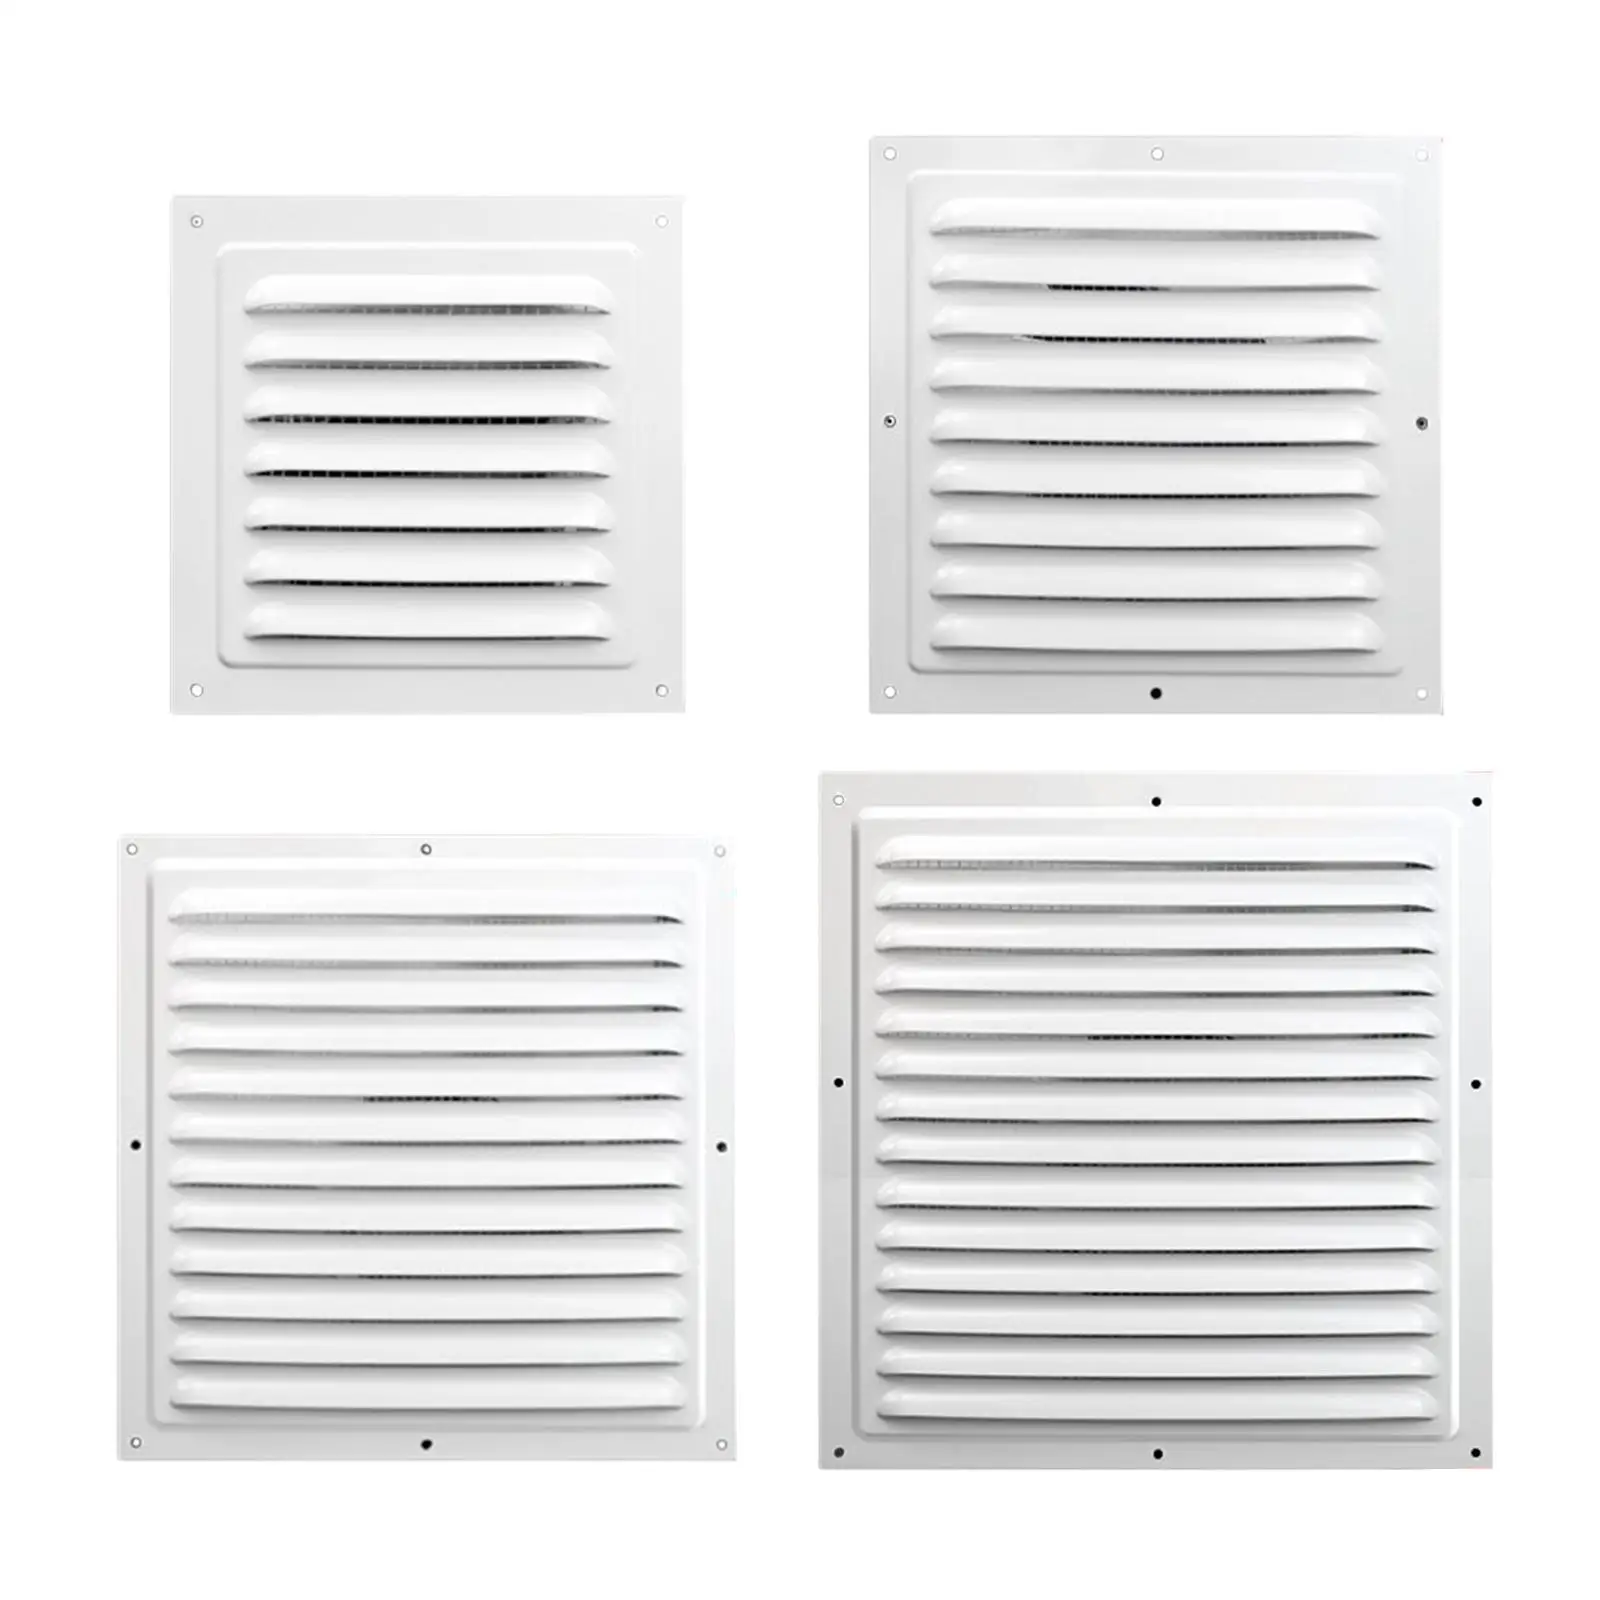 ventilation grille cover, air return grille cover for kitchens,